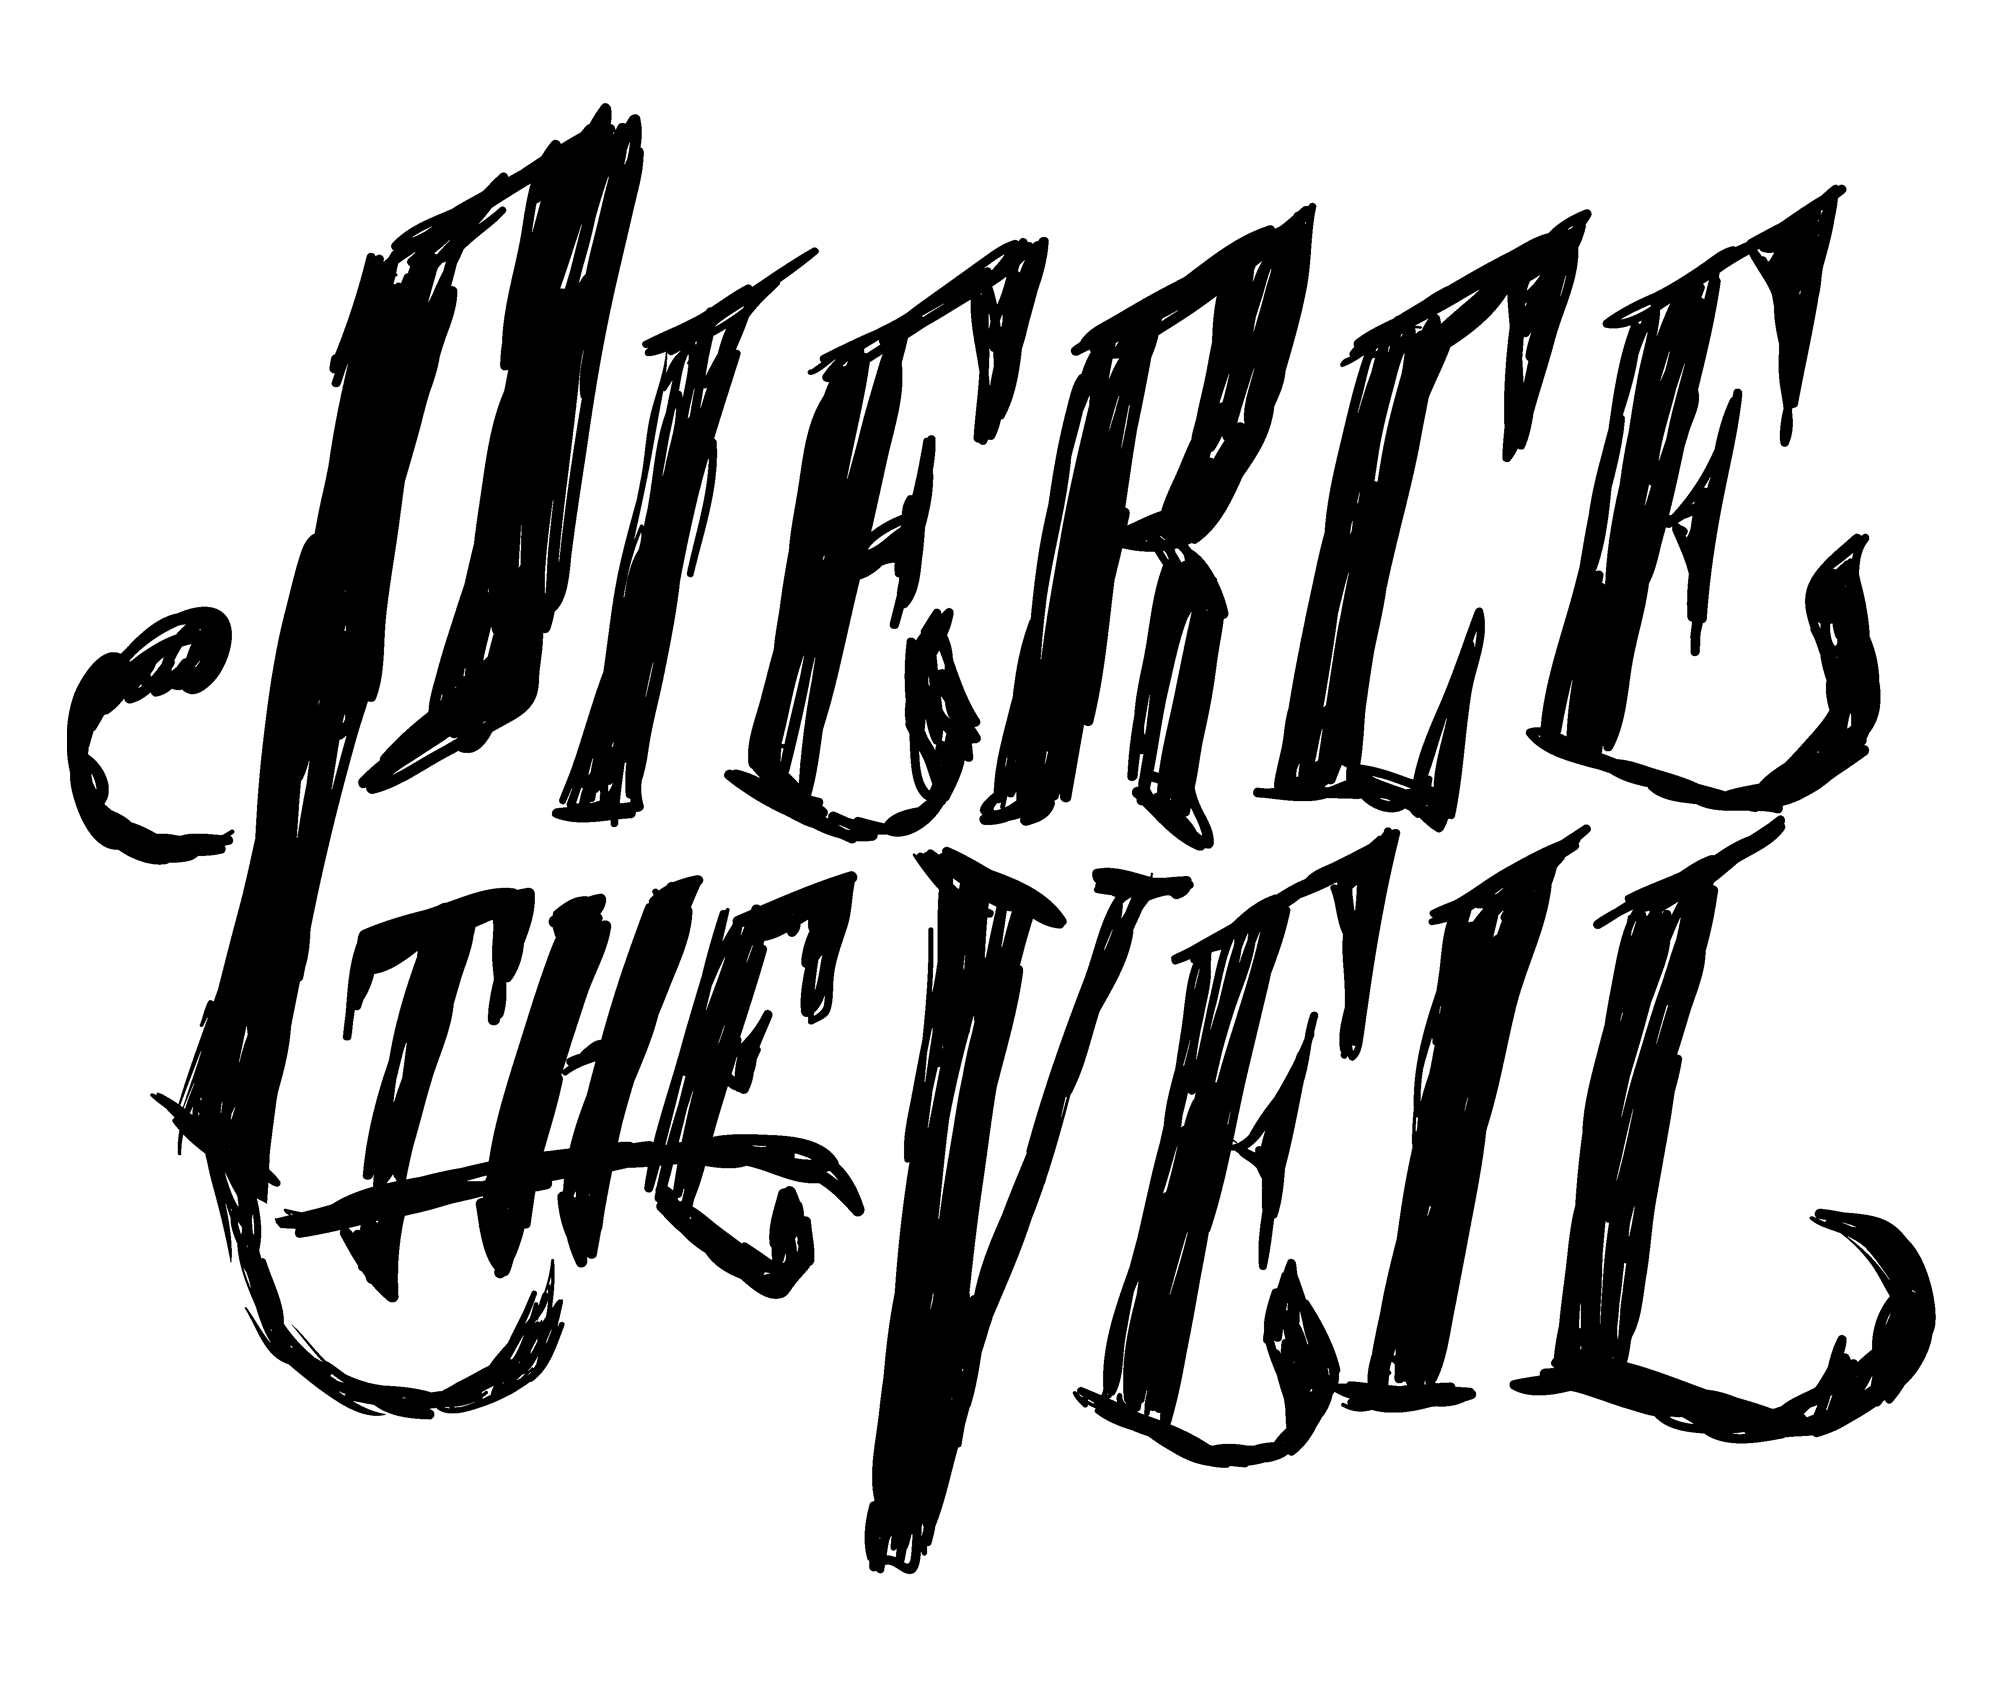 Pierce The Veil Logo - Pierce the Veil Logo, Pierce the Veil Symbol, Meaning, History